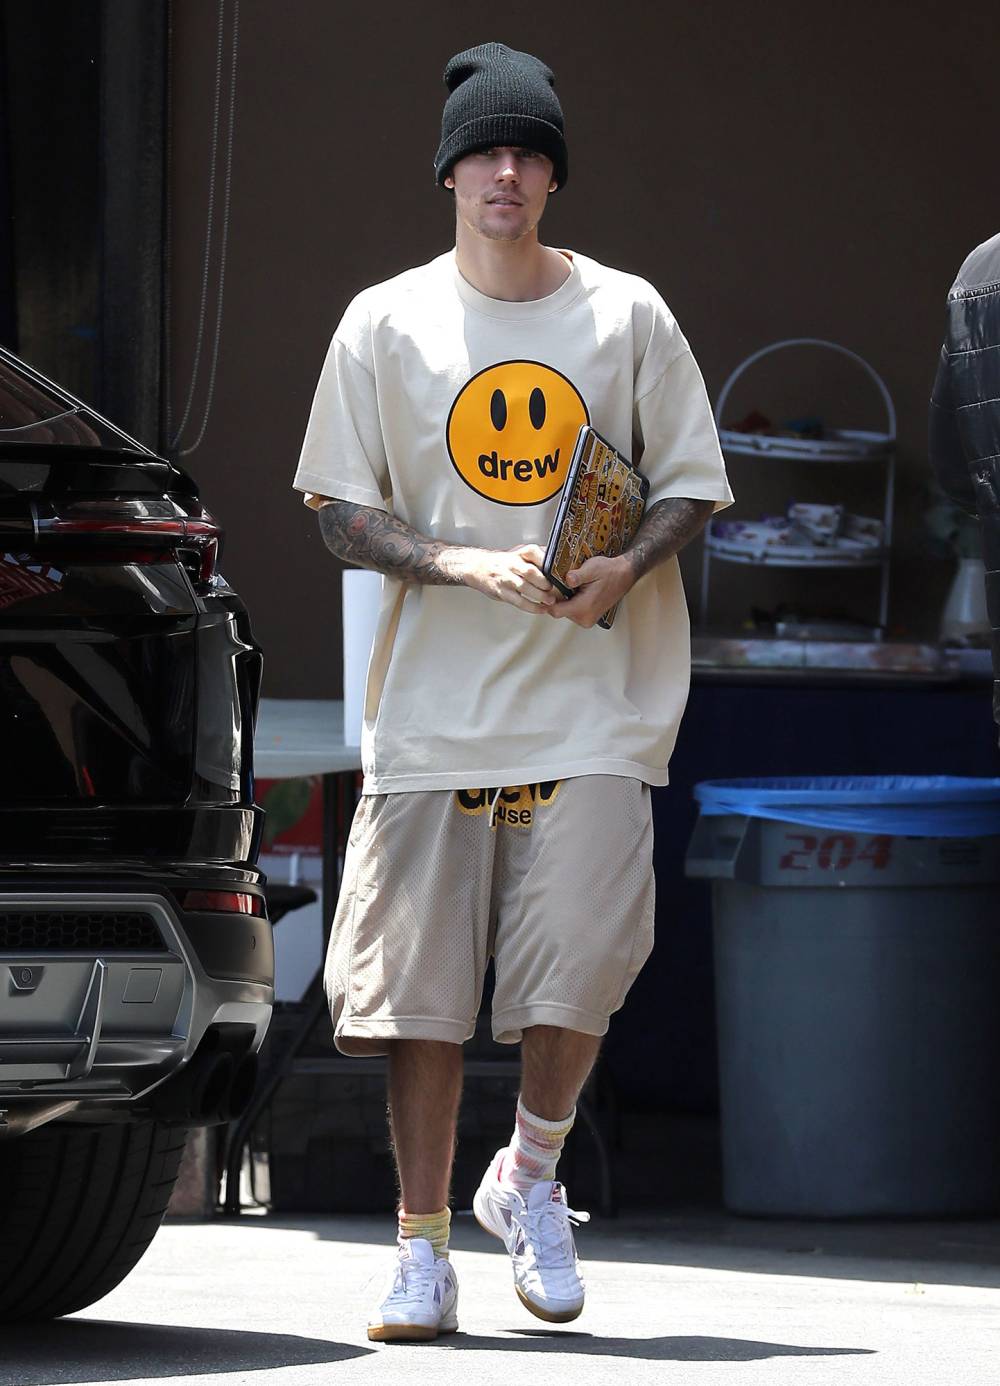 Justin Bieber Wearing Knit Hat and Smile Face Drew Shirt and Shorts